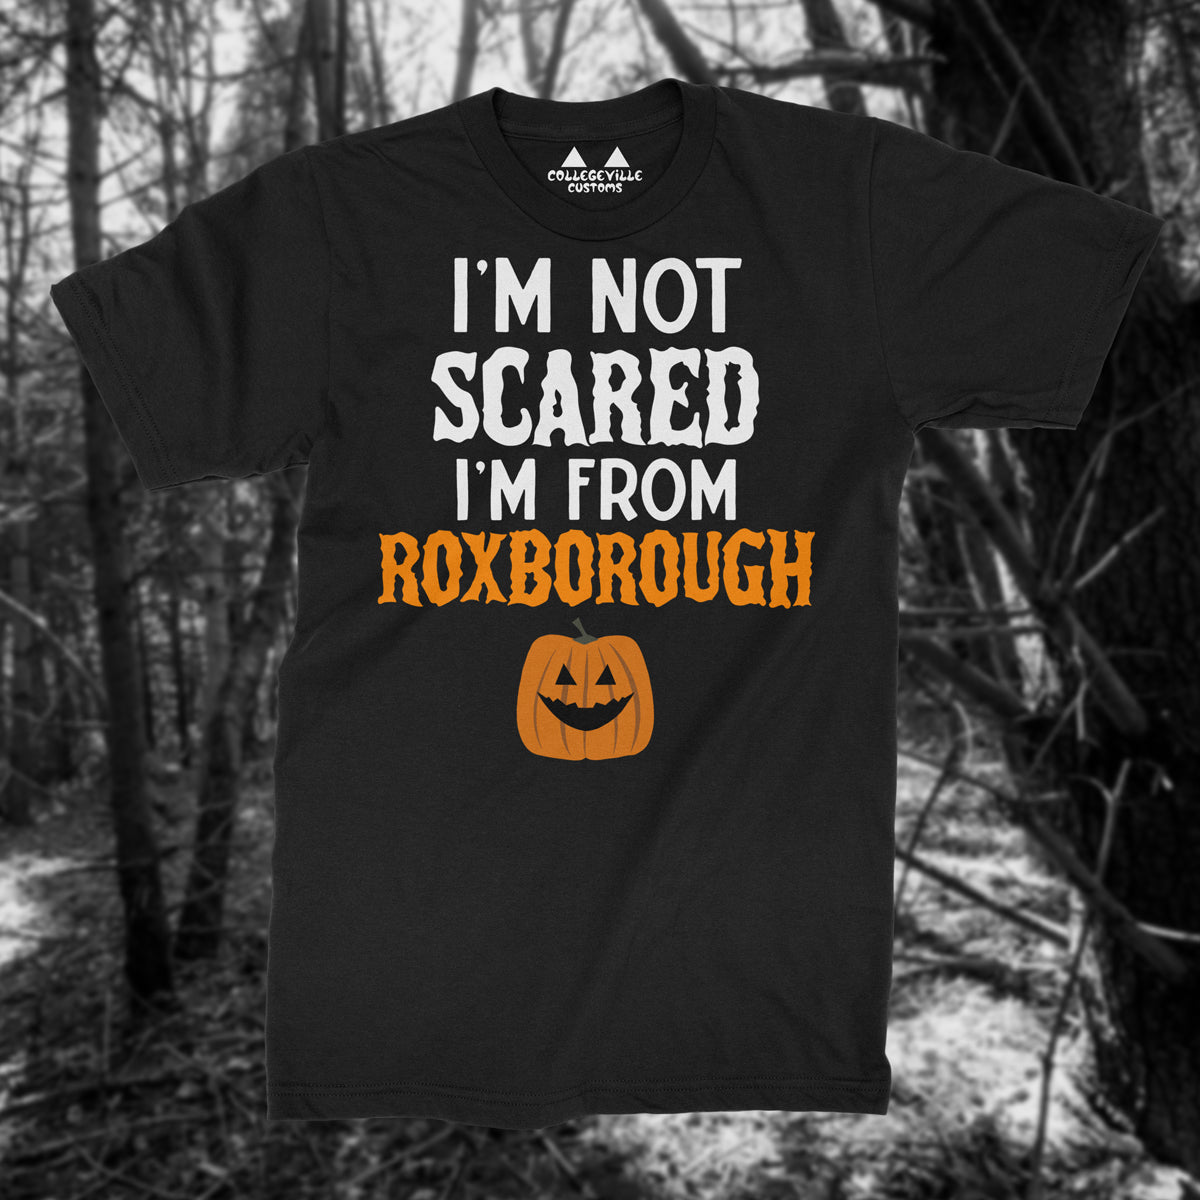 "I'm Not Scared I'm from Roxborough" Funny T-Shirt